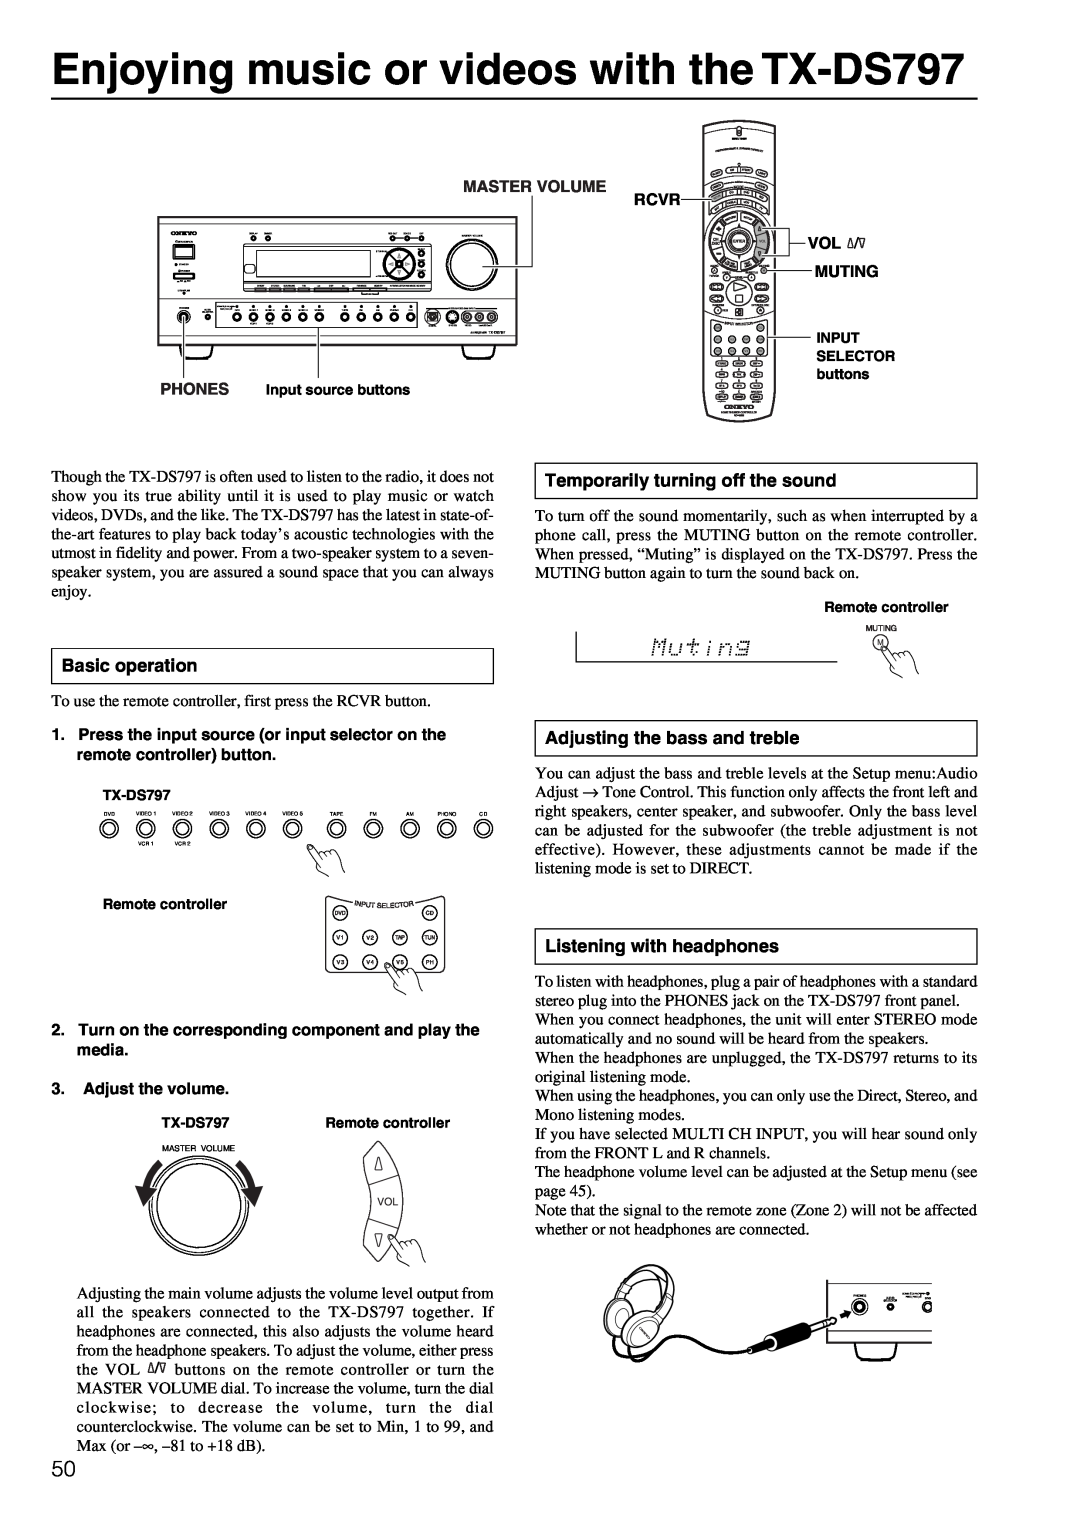 Onkyo instruction manual Enjoying music or videos with the TX-DS797, Temporarily turning off the sound, Basic operation 